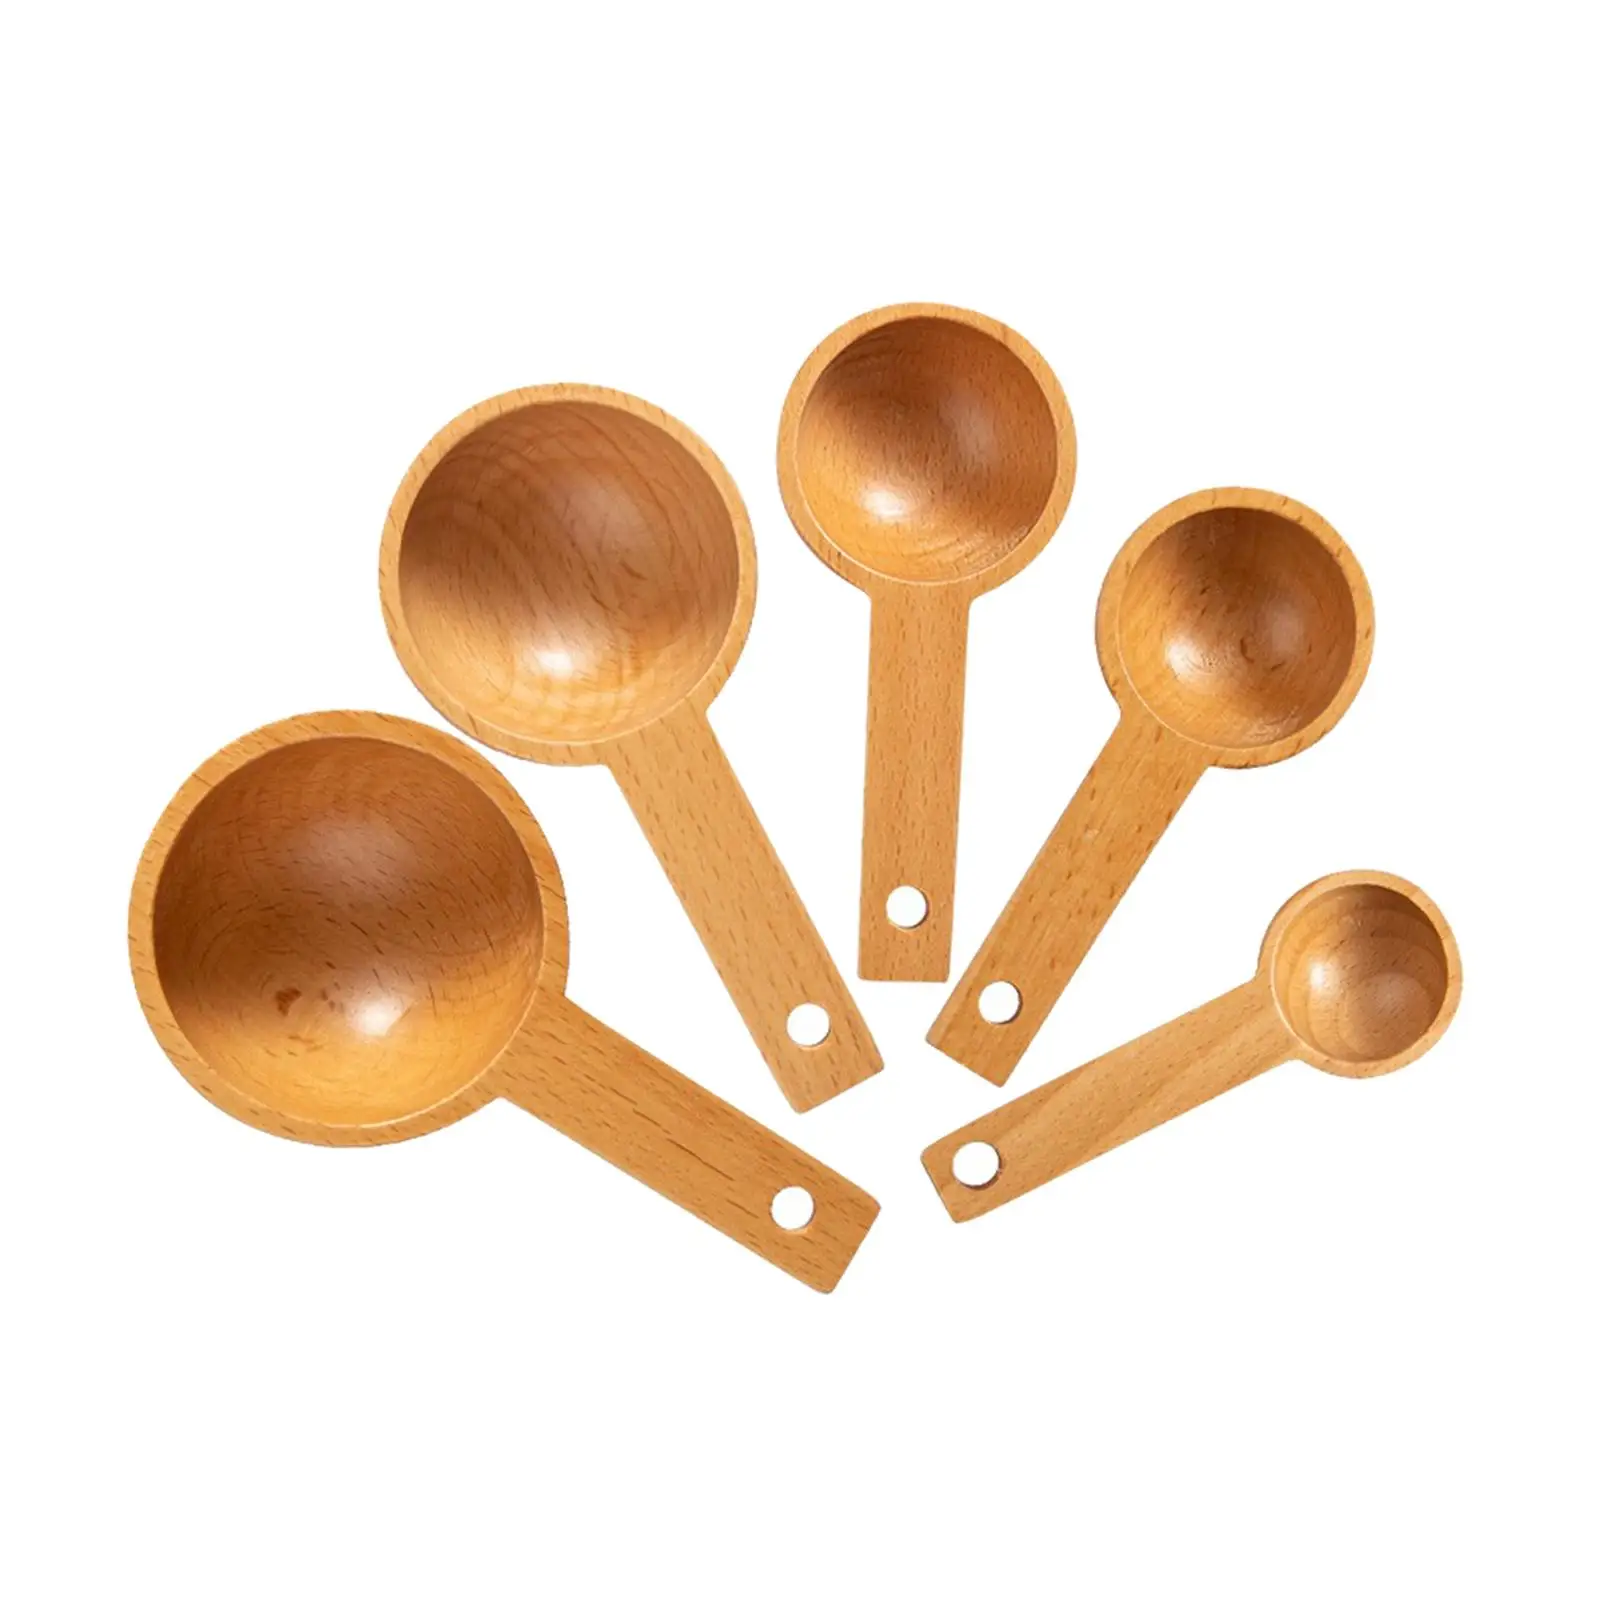 5 Sizes Wood Measuring Spoons Coffee Spoon Tablespoon for Kitchen Cooking